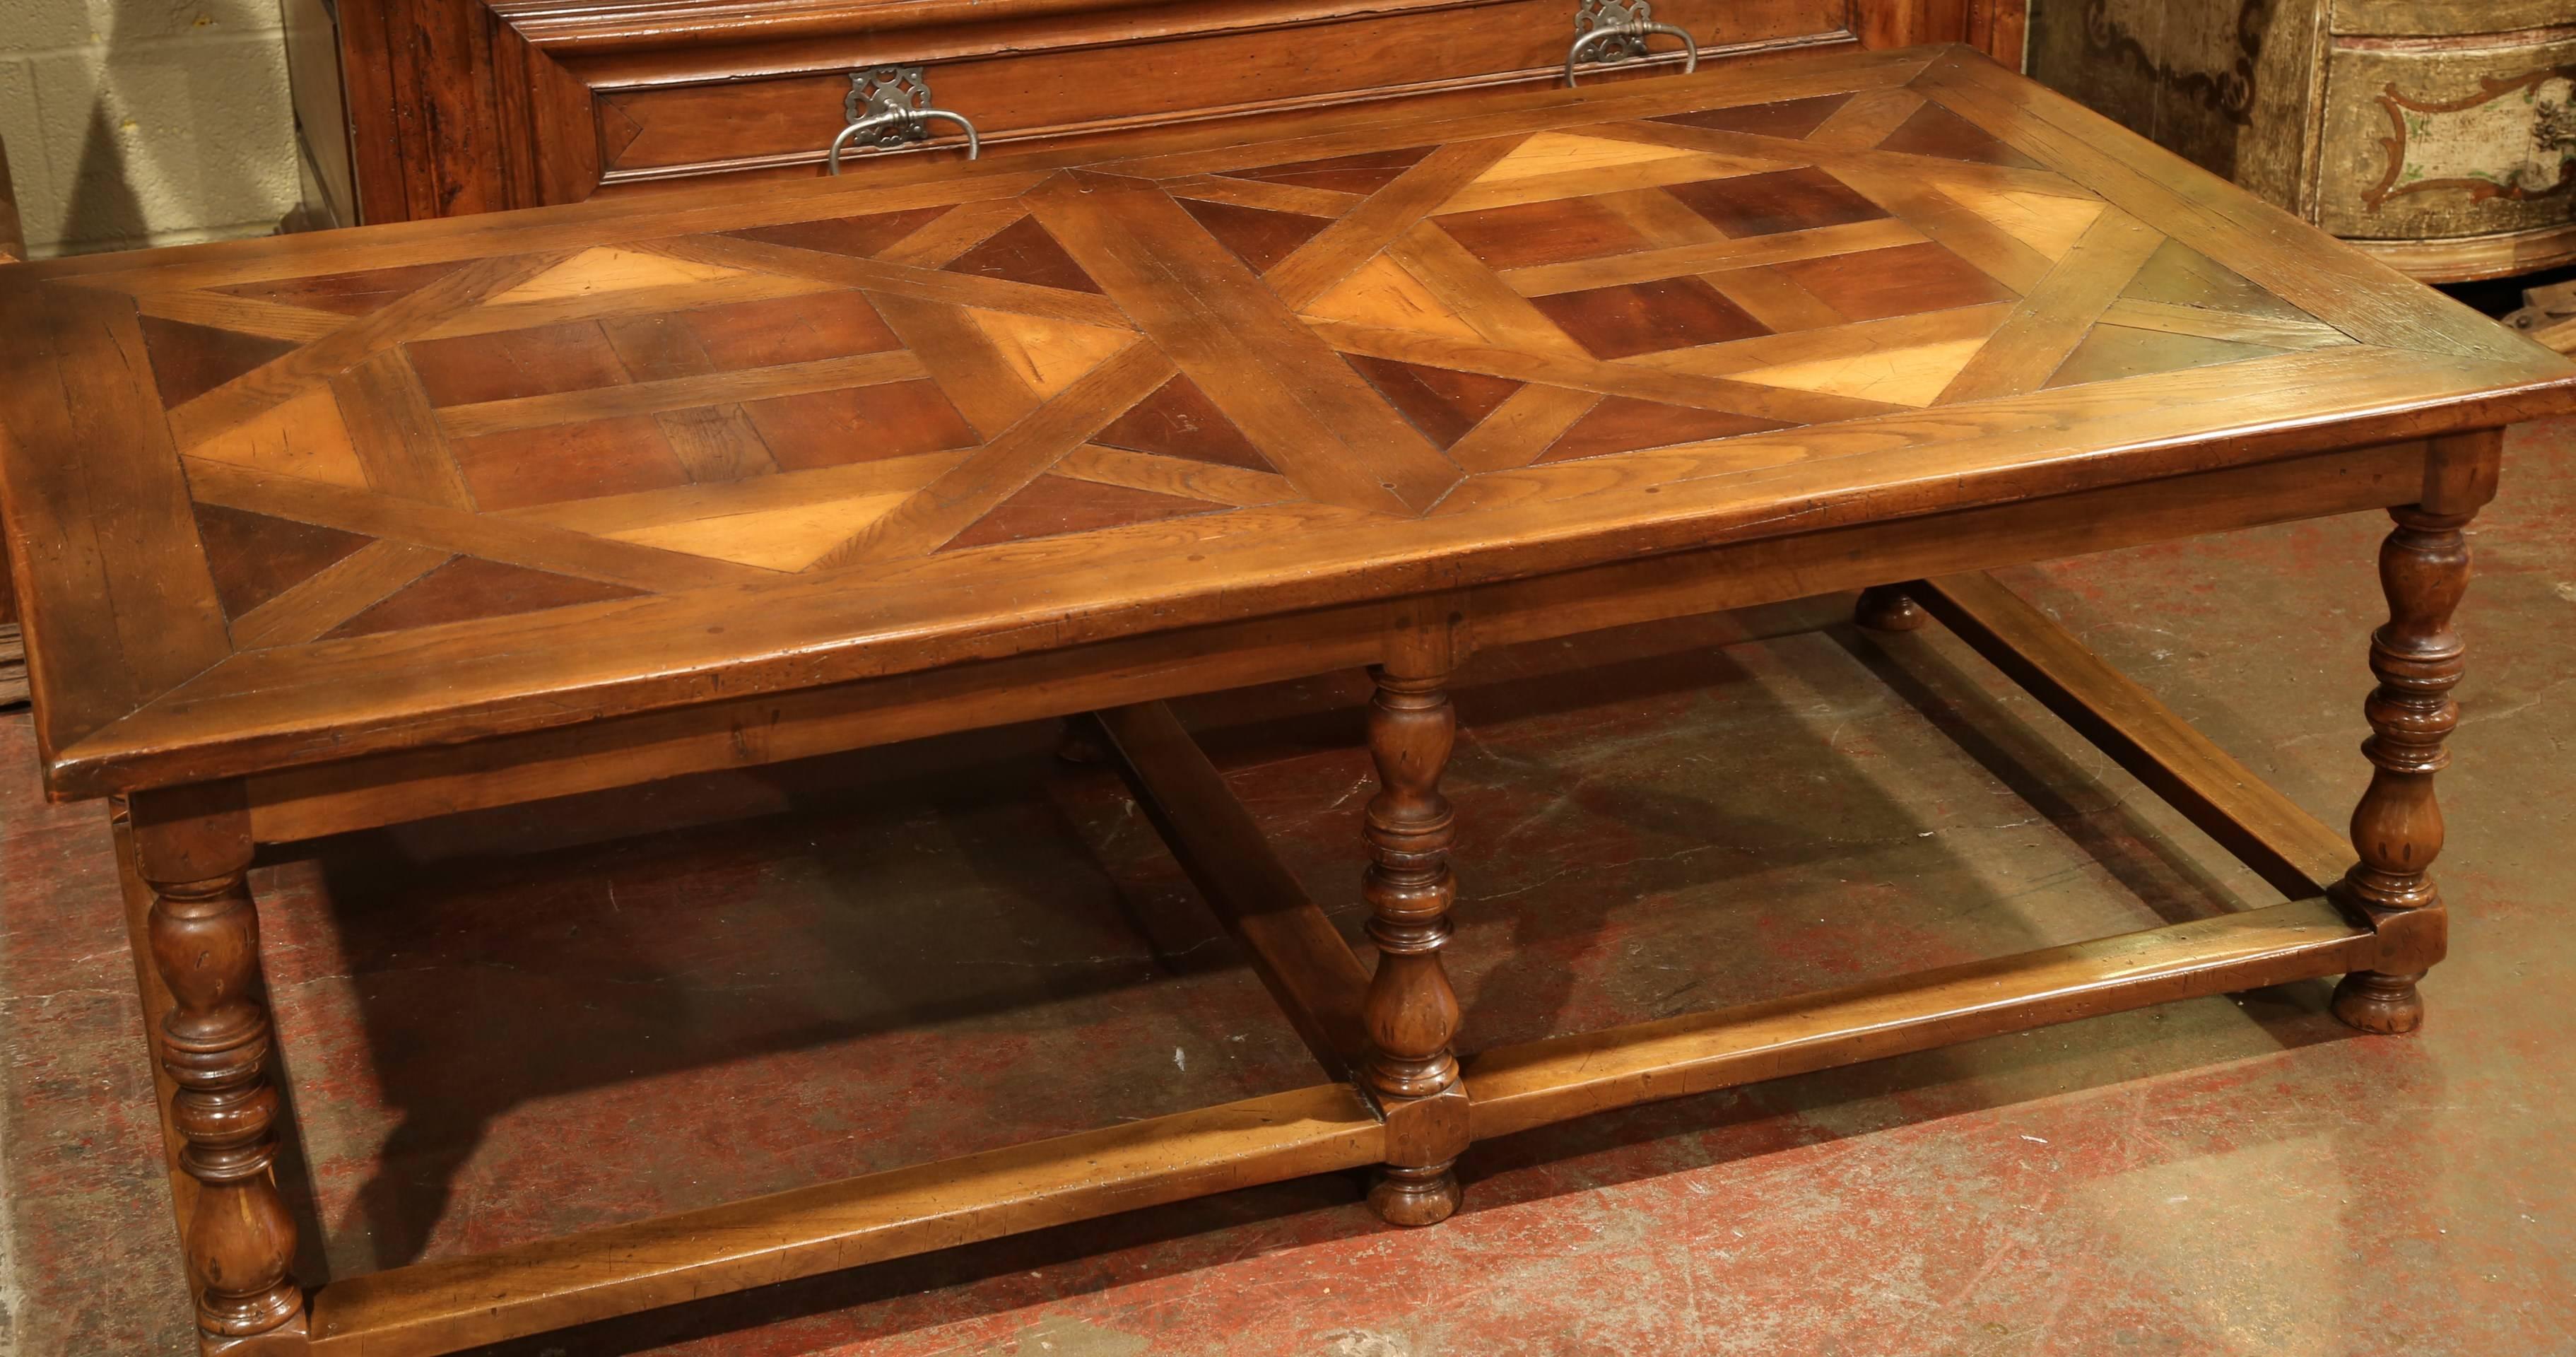 Hand-Carved Large French Carved Walnut Coffee Table with Parquet Top over Six Turned Legs